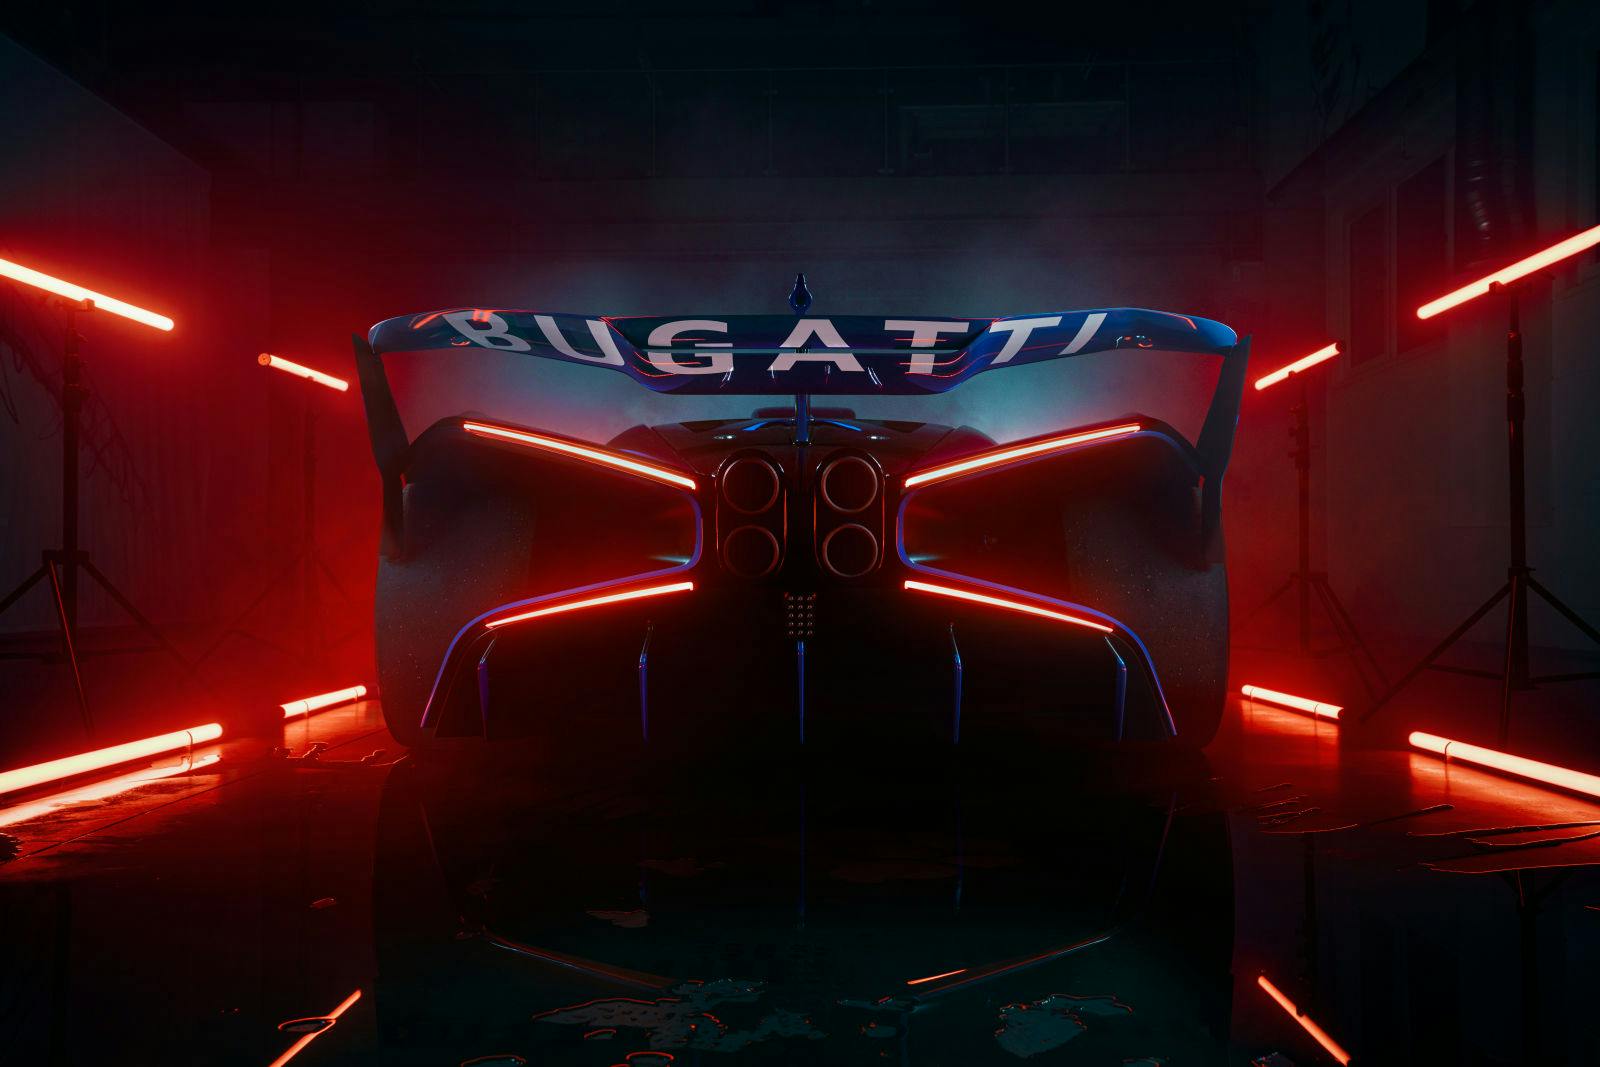 The Bugatti Bolide wins the price of the most beautiful hyper sports car of the year 2020 at the Festival Automobile International" in Paris. "